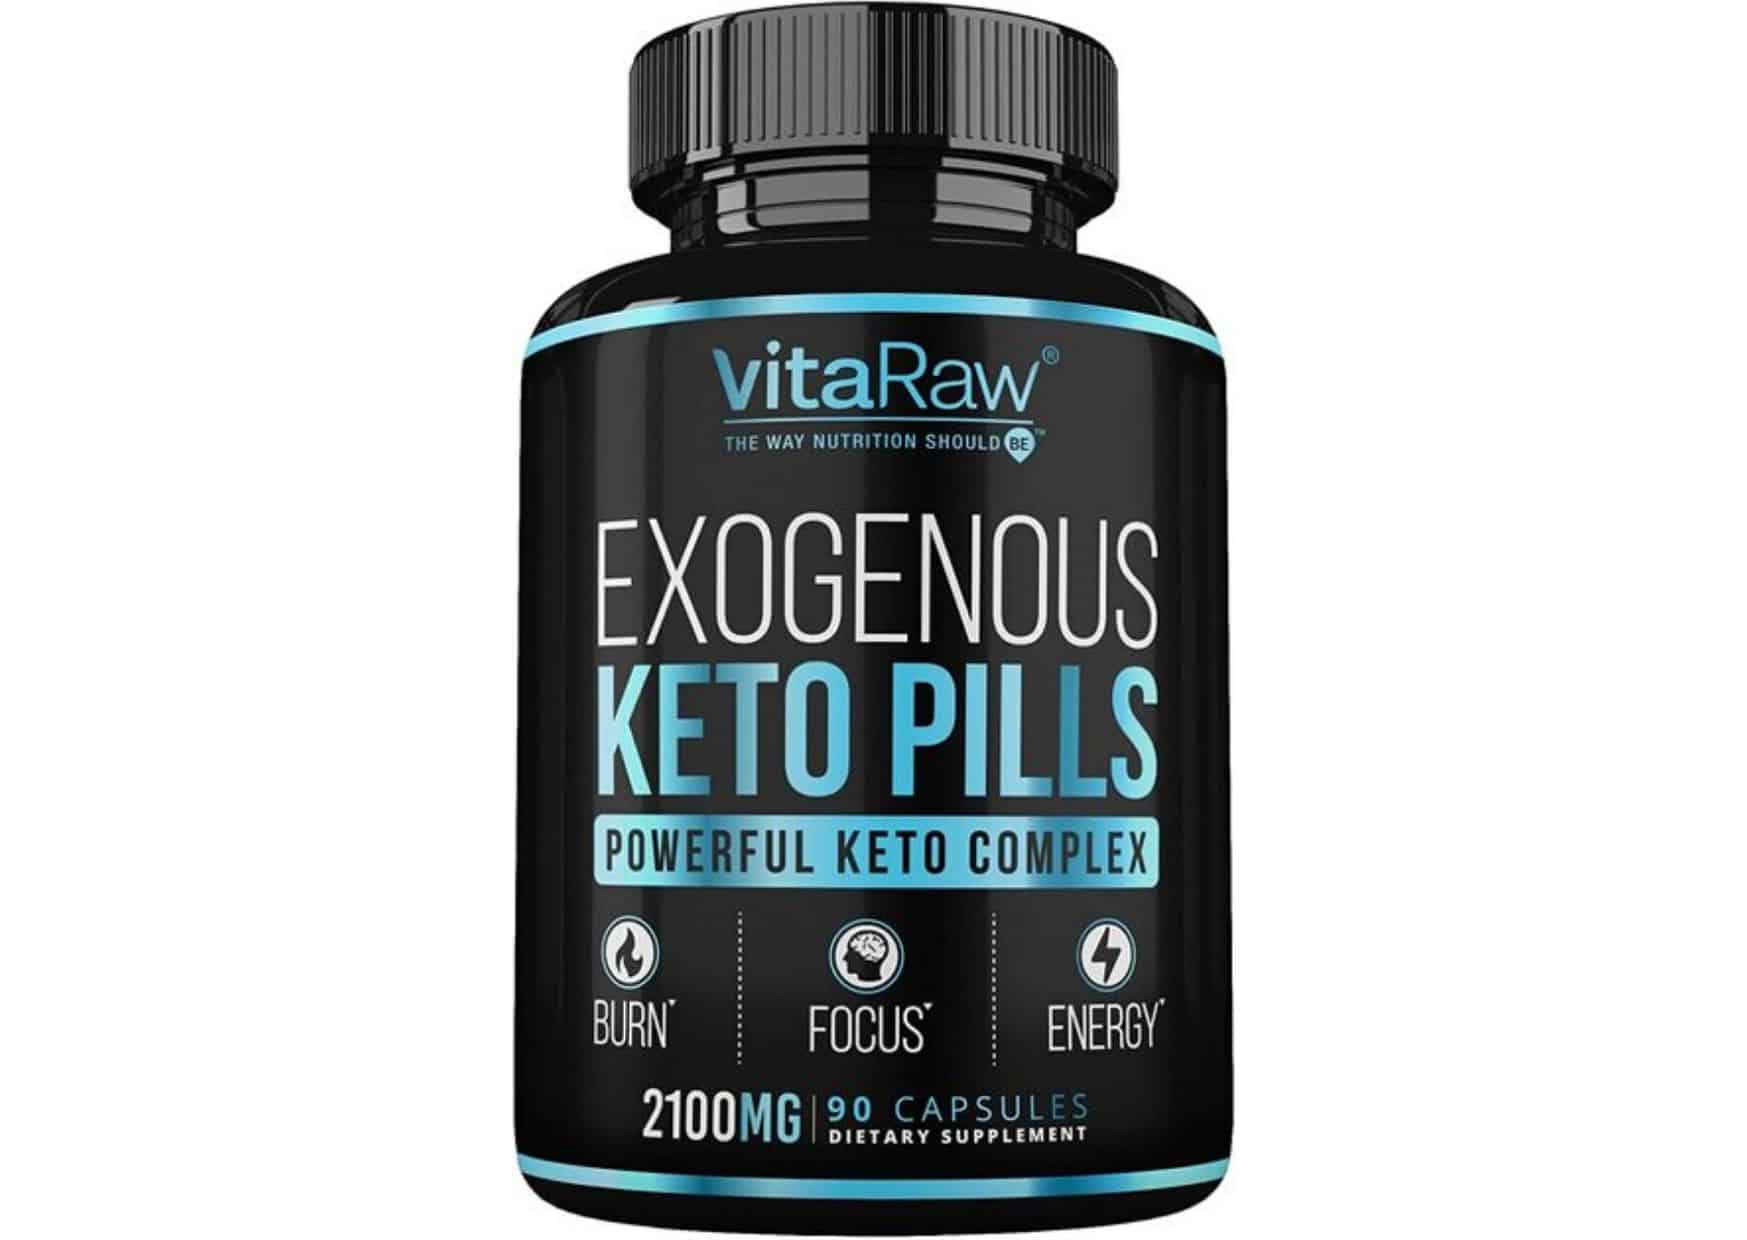 5 Best Keto Diet Pills to Help You Lose Weight